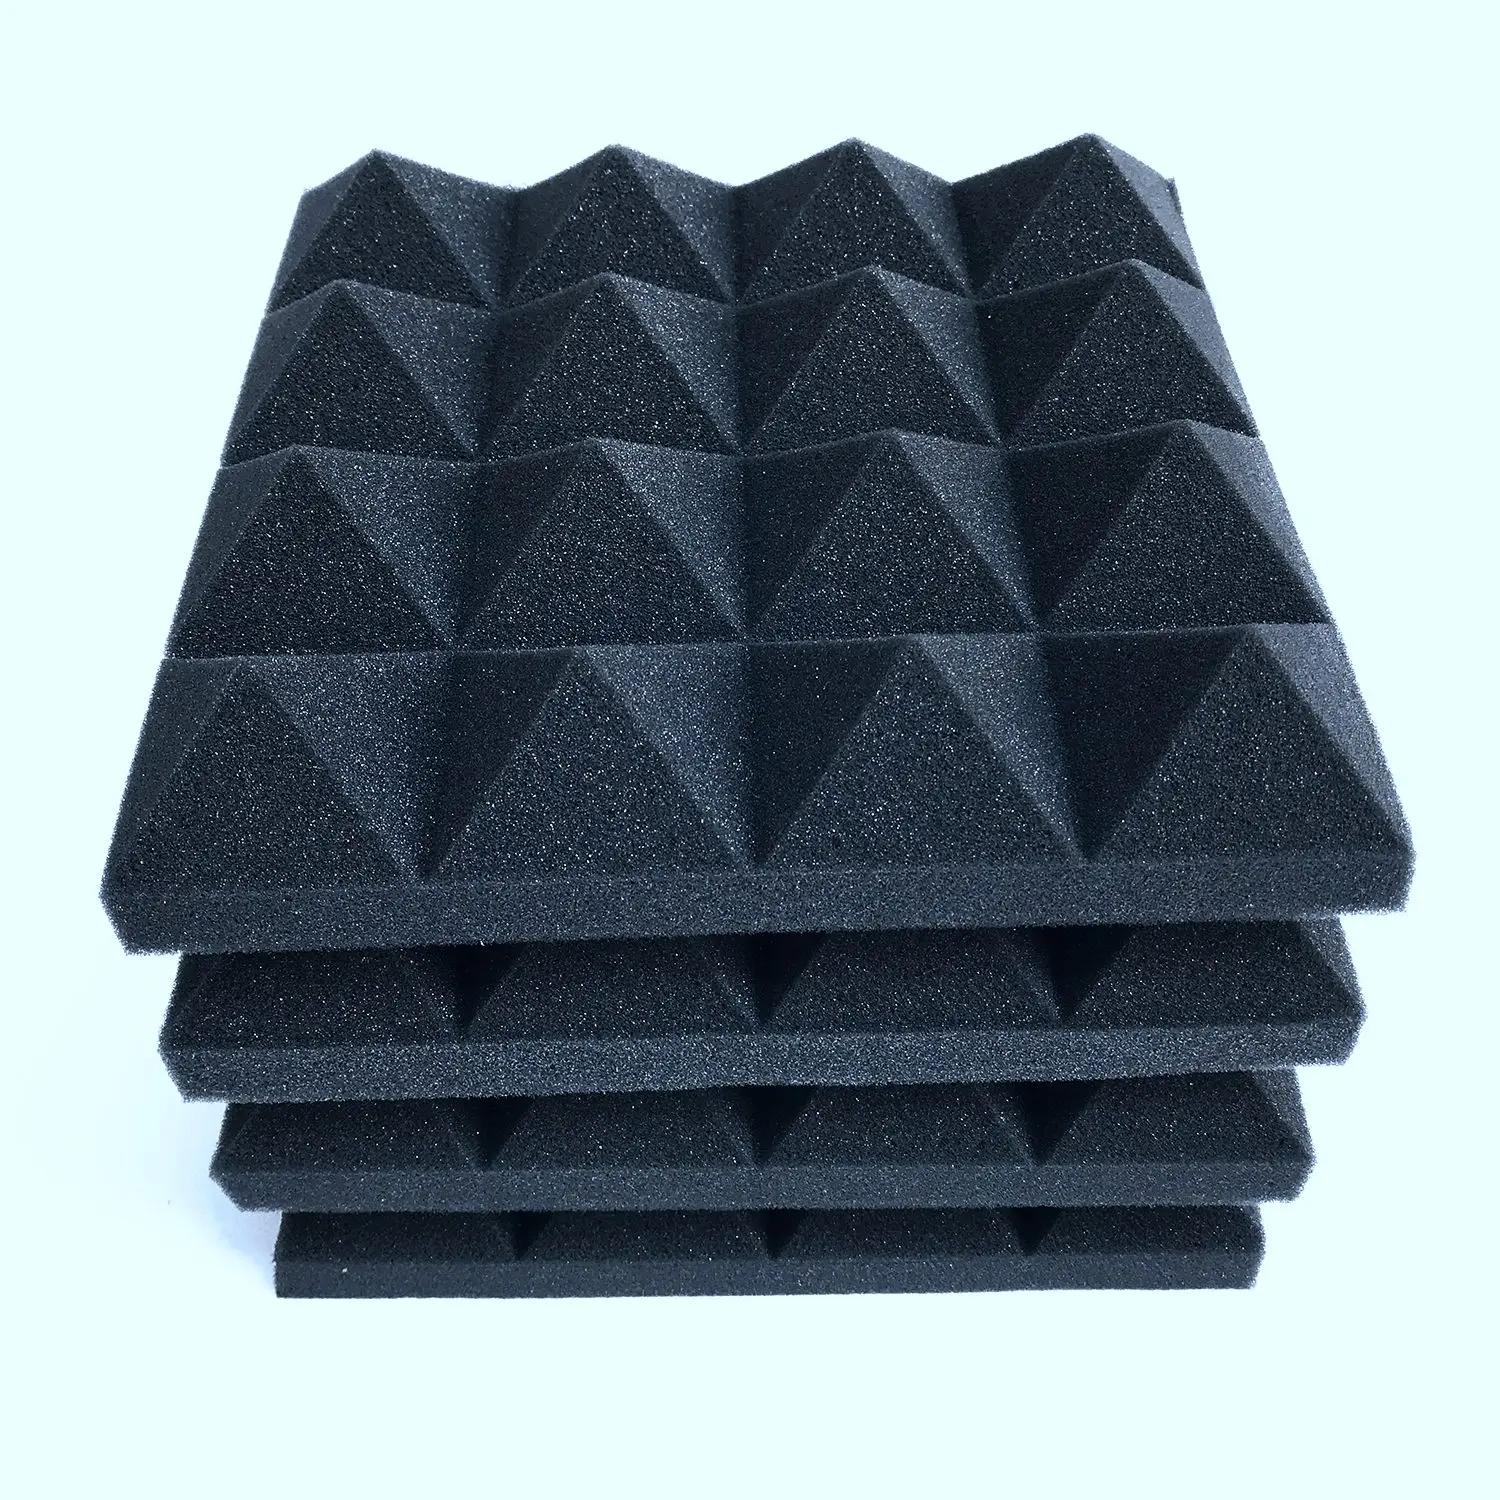 24 Pack 2x12x12 Soundproofing Acoustic Foam Fireproof Studio Sound Absorption Pyramid Treatment High Density Wall Padding Foam Wedge Tiles Sound Blocking/Absorbing/Noise Dampening Foam Black 